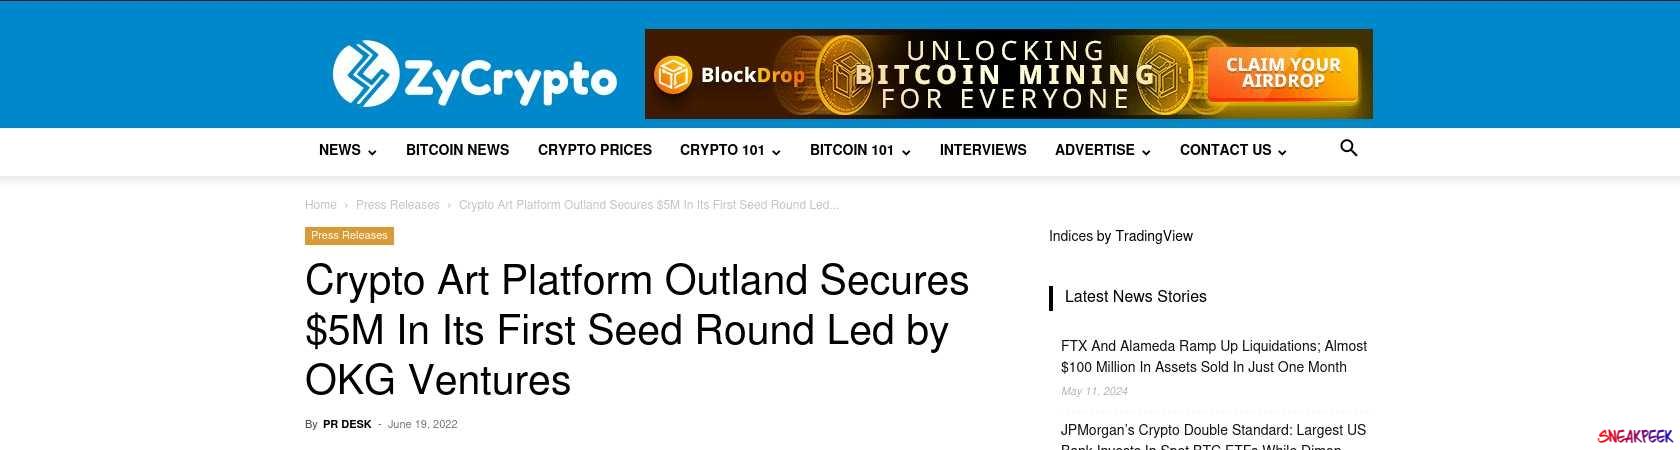 Read the full Article:  ⭲ Crypto Art Platform Outland Secures $5M In Its First Seed Round Led by OKG Ventures